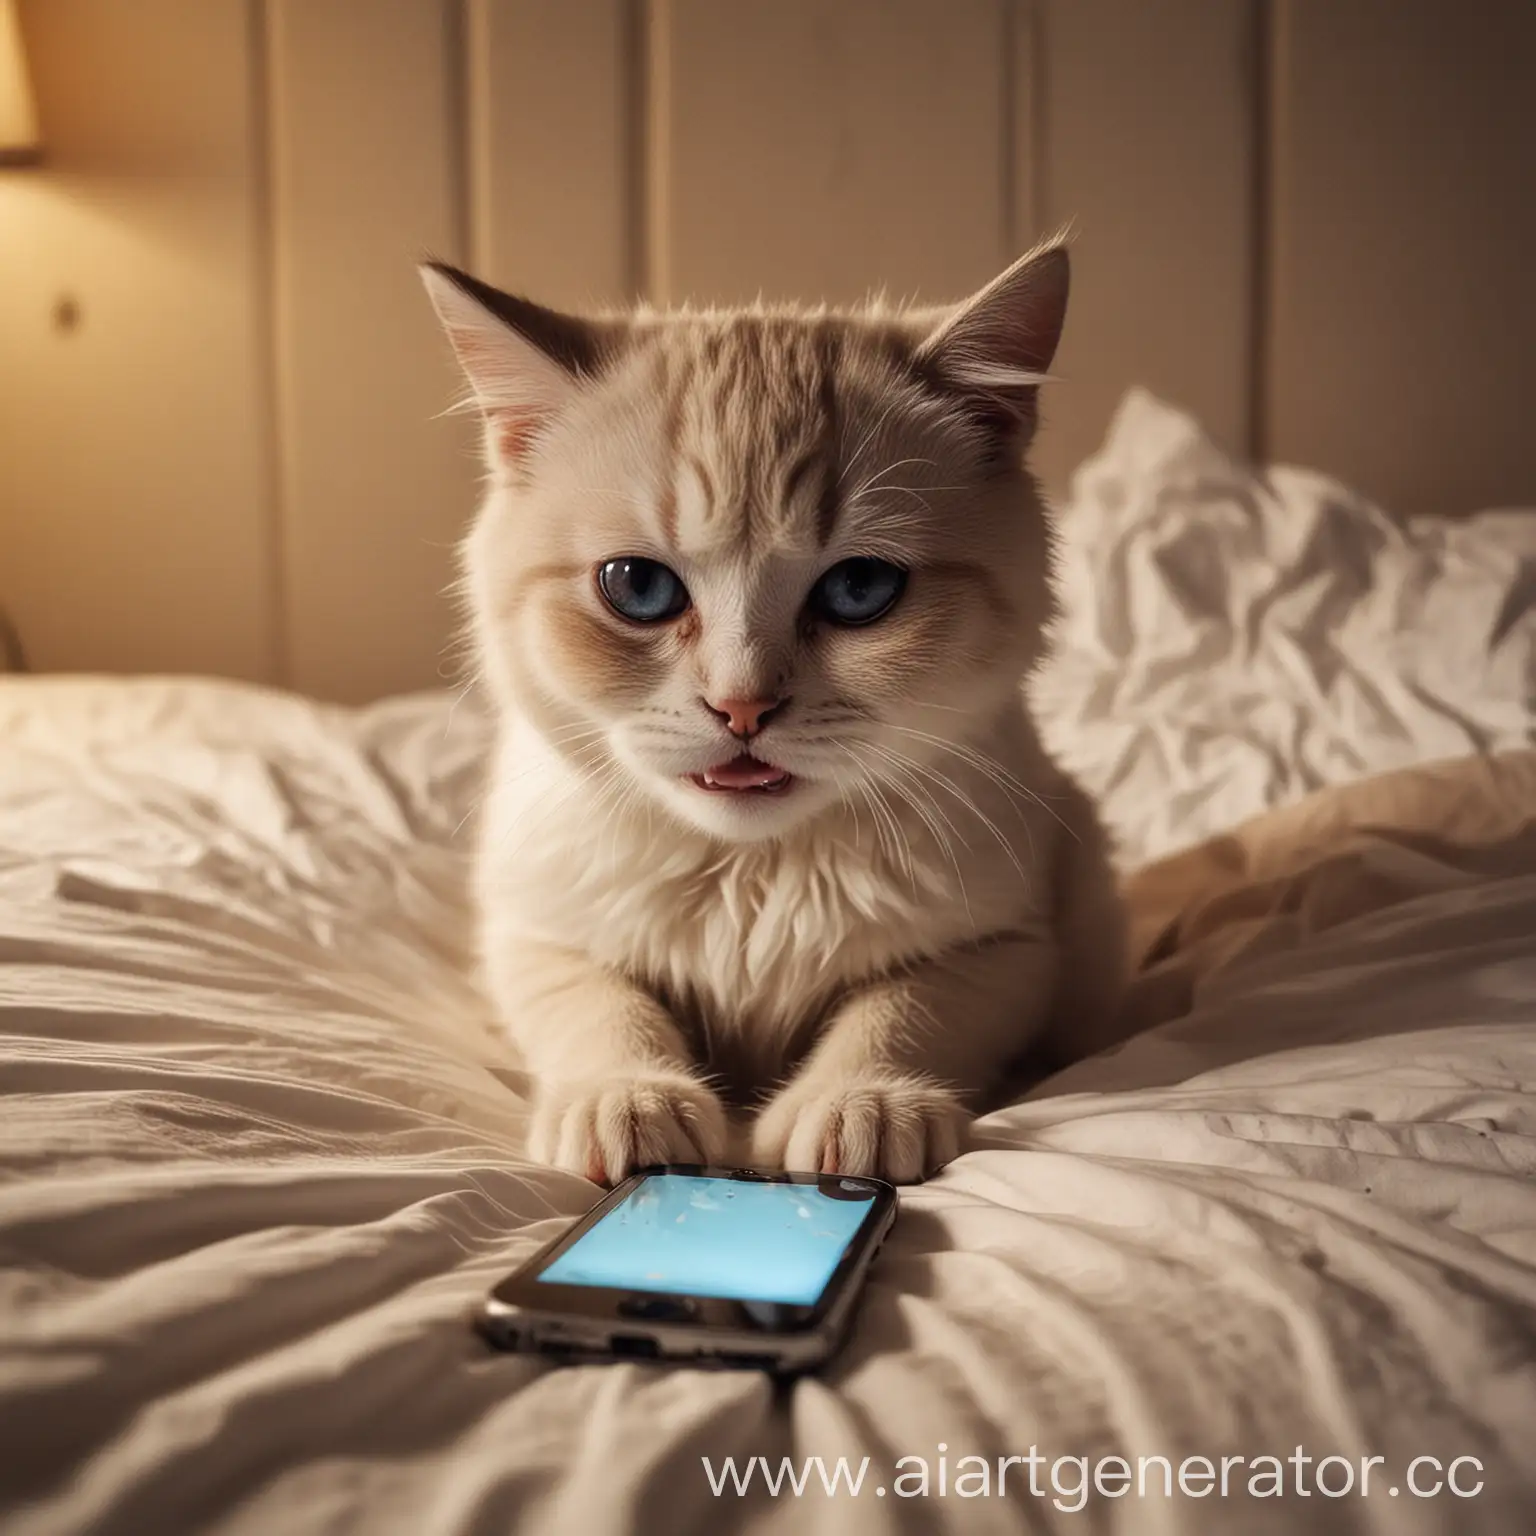 Sad-Kitty-Sitting-on-Bed-with-iPhone